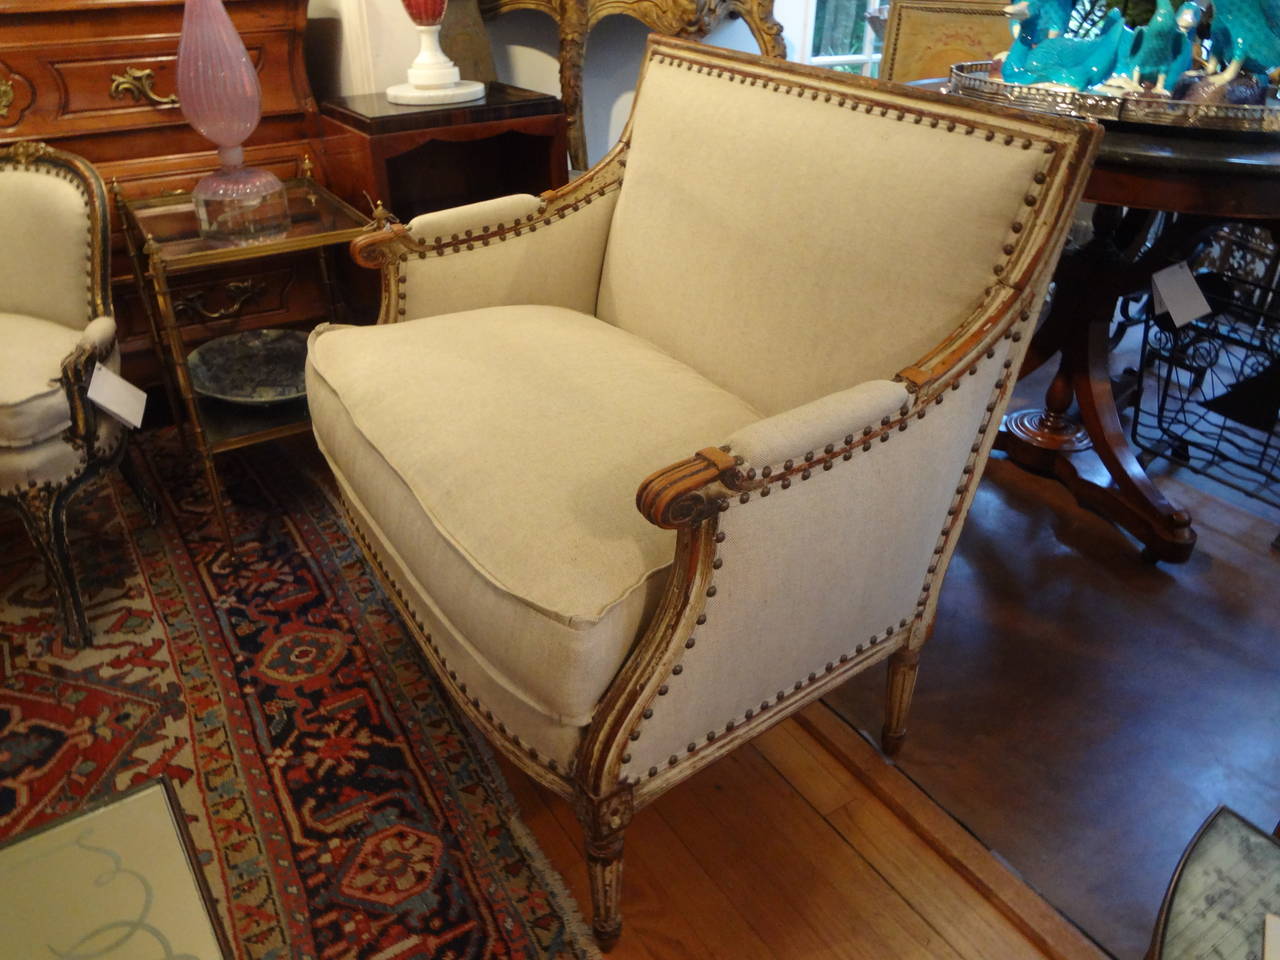 Late 18th early 19th century French Louis XVI painted canapé or bergere chair. Professionally upholstered in oatmeal linen with down wrapped cushion and spaced French brass nailhead detail.  Gorgeous Desirable Patina.

Please click KIRBY ANTIQUES